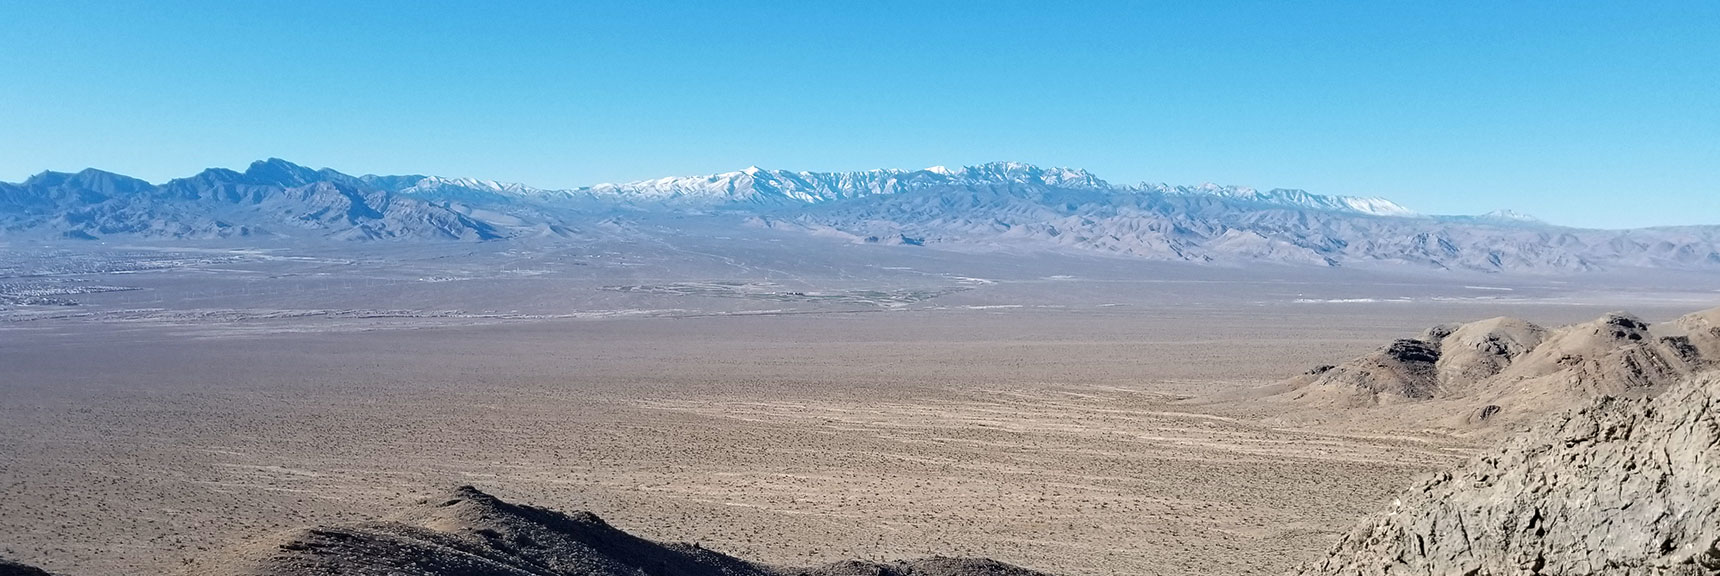 La Madre Mountain Wilderness and Mt Charleston as Seen from 3000ft on Gass Peak SW Approach